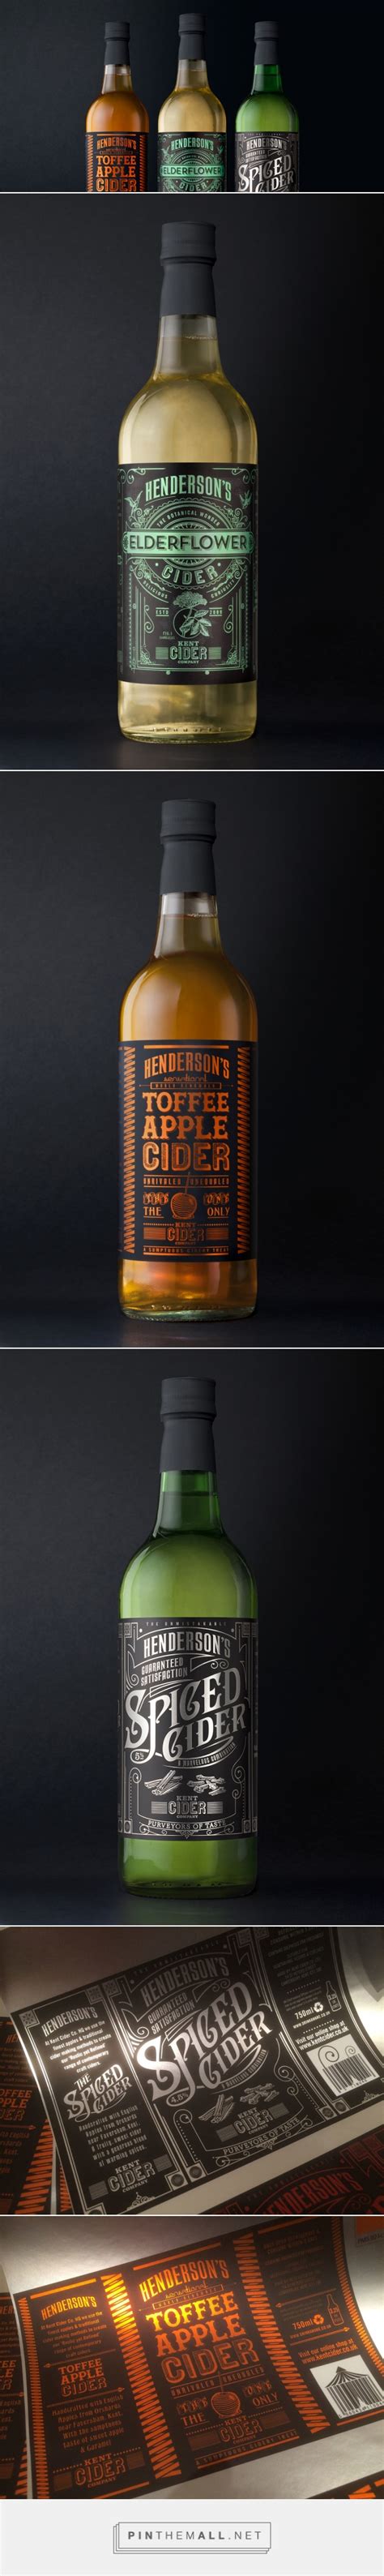 Hendersons Cider Redesign — The Dieline Branding And Packaging A